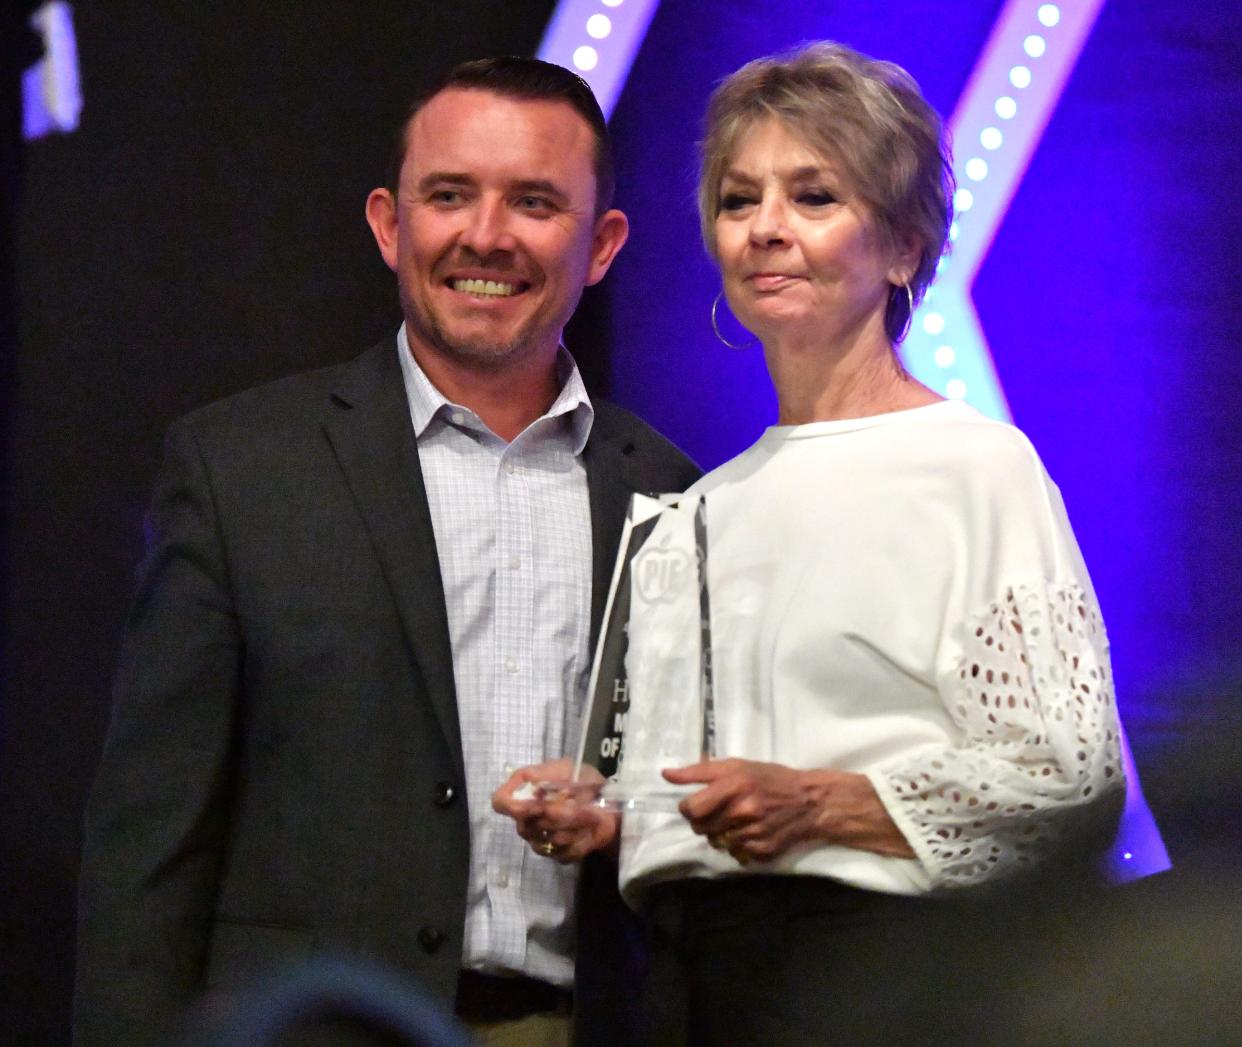 Clydette Holcomb, right, wins the Mentor of the Year award during the PIE appreciation dinner at Faith Baptist Church in Wichita Falls on Tuesday. Dr. Donny Lee, Wichita Falls ISD superintendent, presents the award.